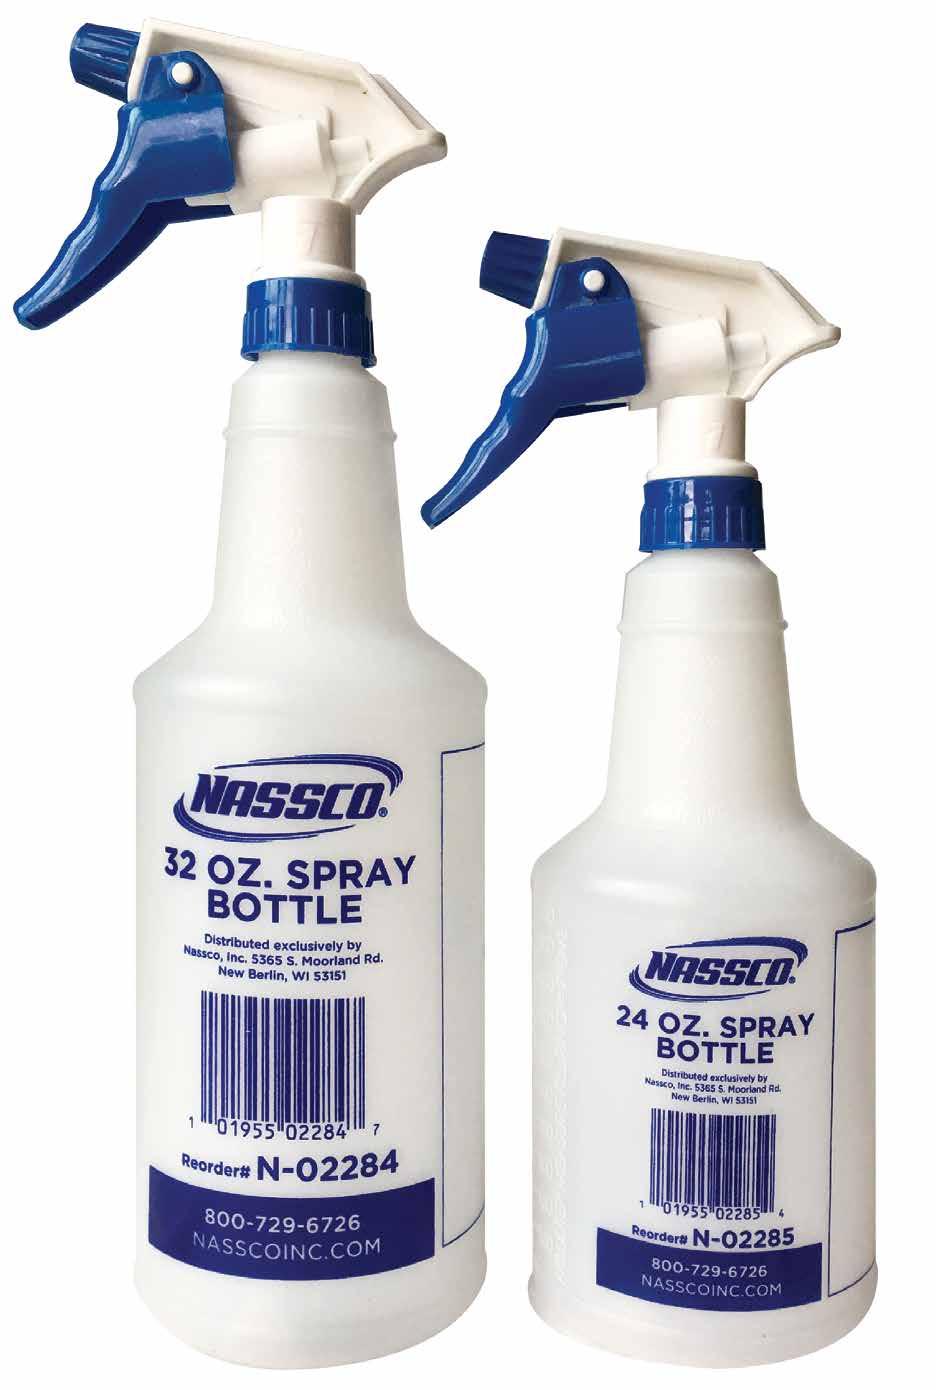 N-02362 100 Powdered Laundry Detergent 50 LB PAIL BOTTLES AND SPRAYERS Nassco carries bottles and trigger sprayers which can be used with secondary labels, or for just about any purpose you can think